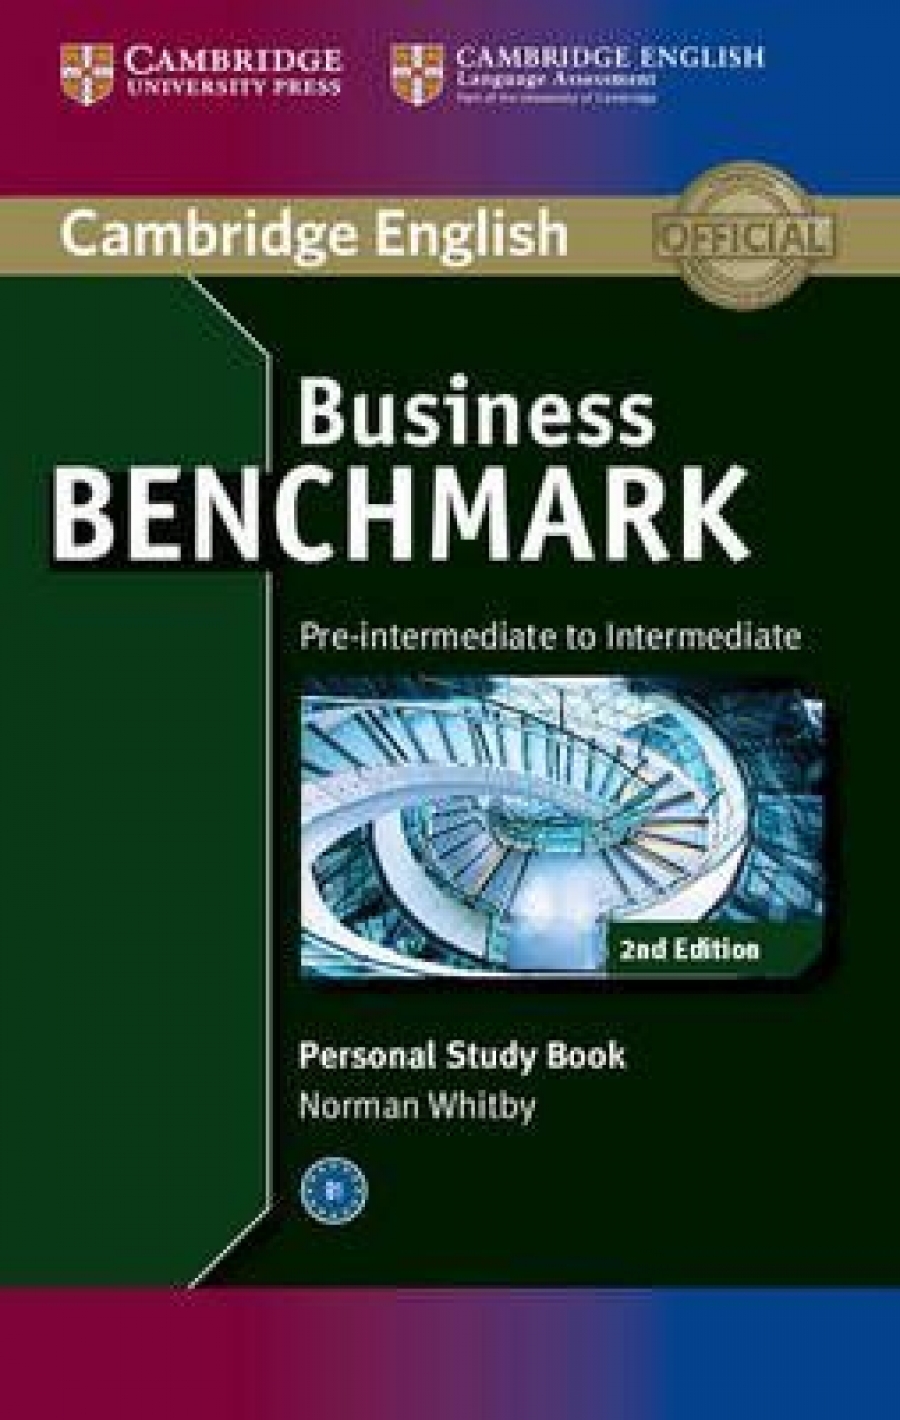 Business Benchmark - 2nd Edition